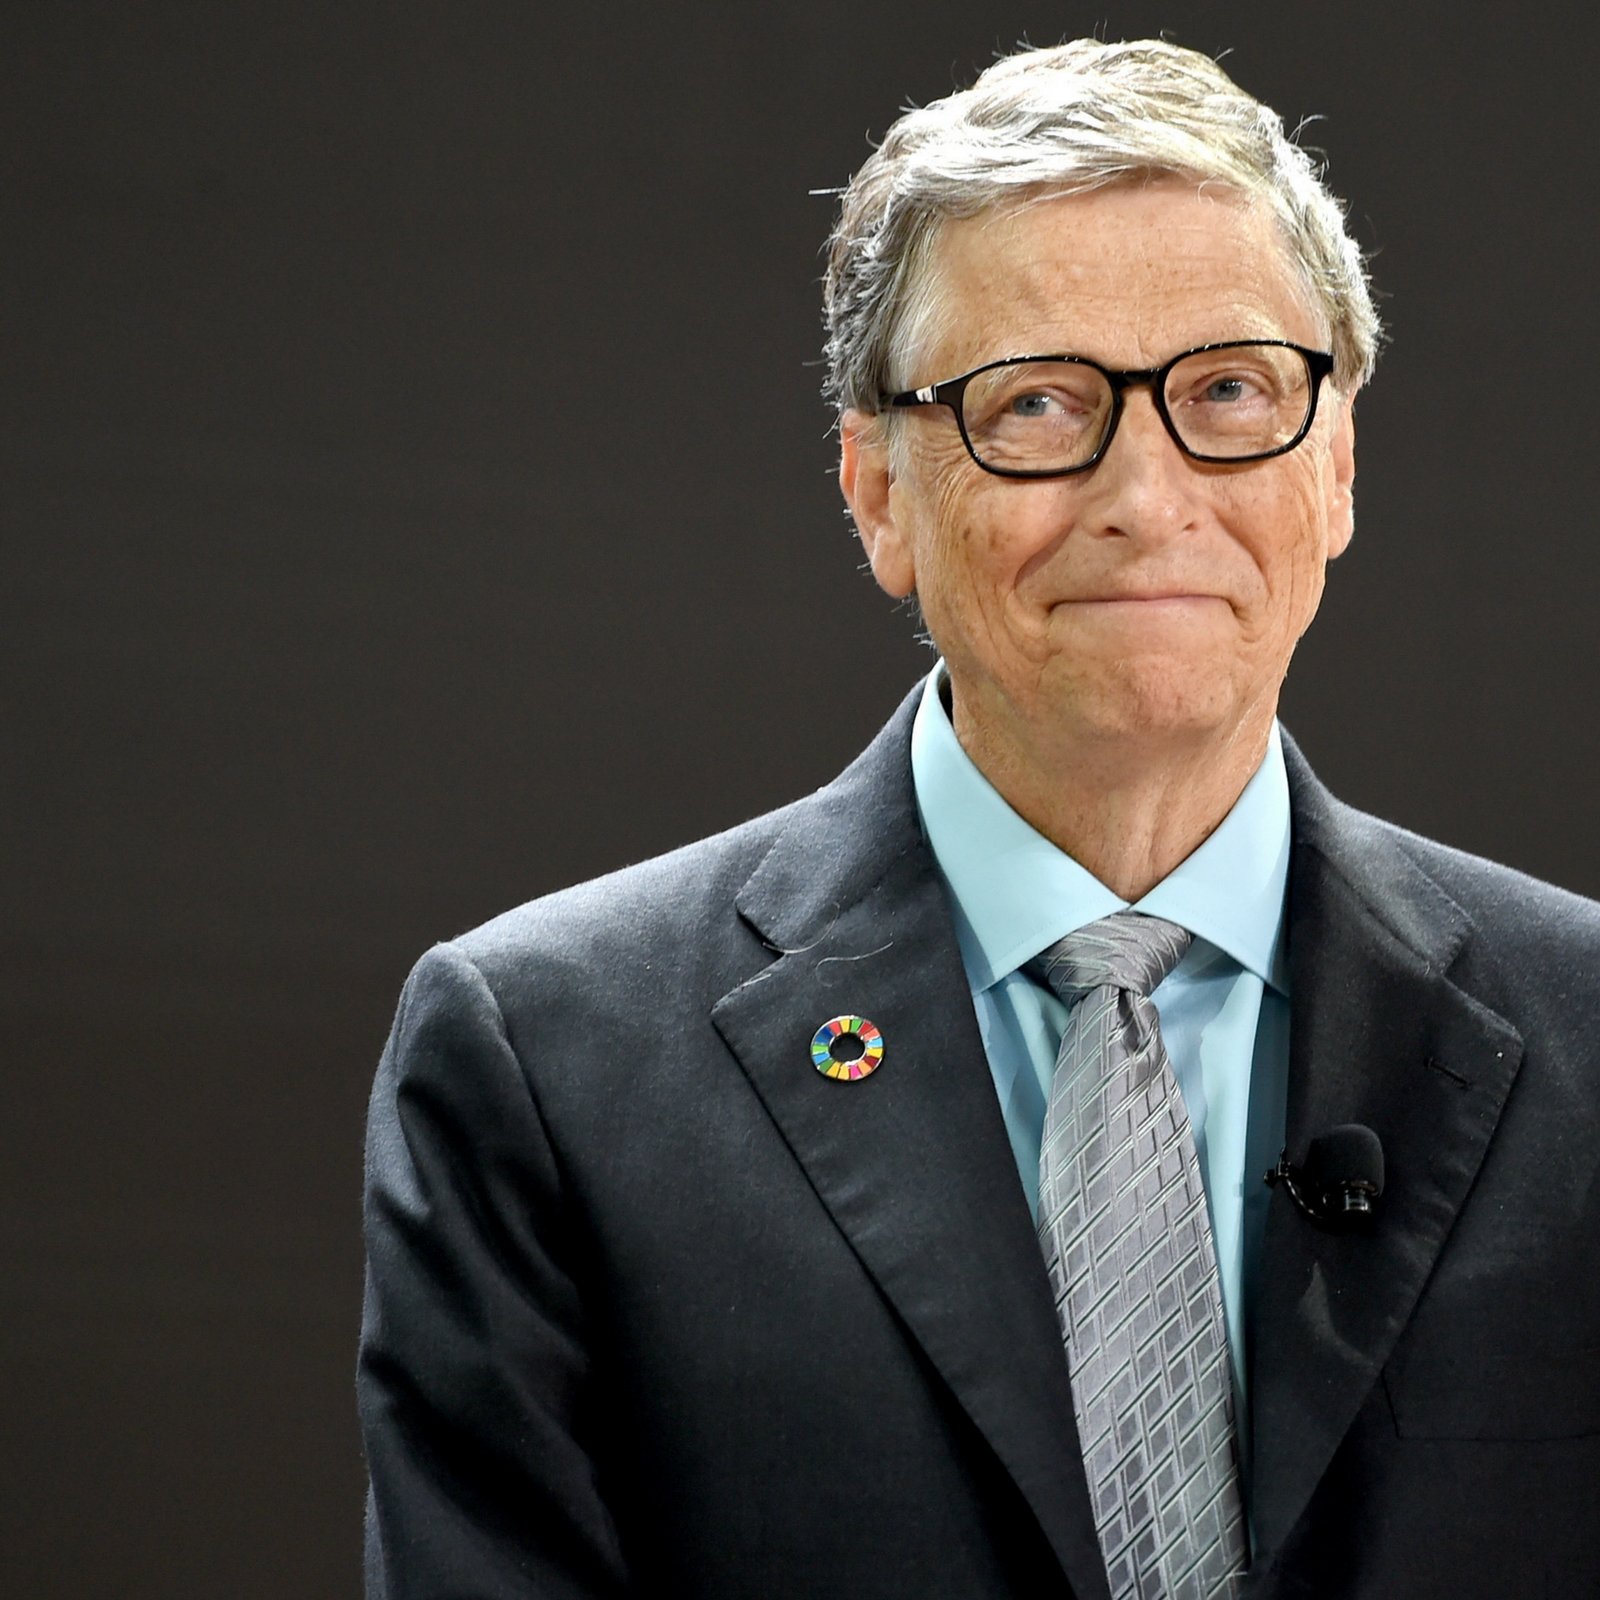 Bill Gates: Crypto Caused Deaths in a Fairly Direct Way